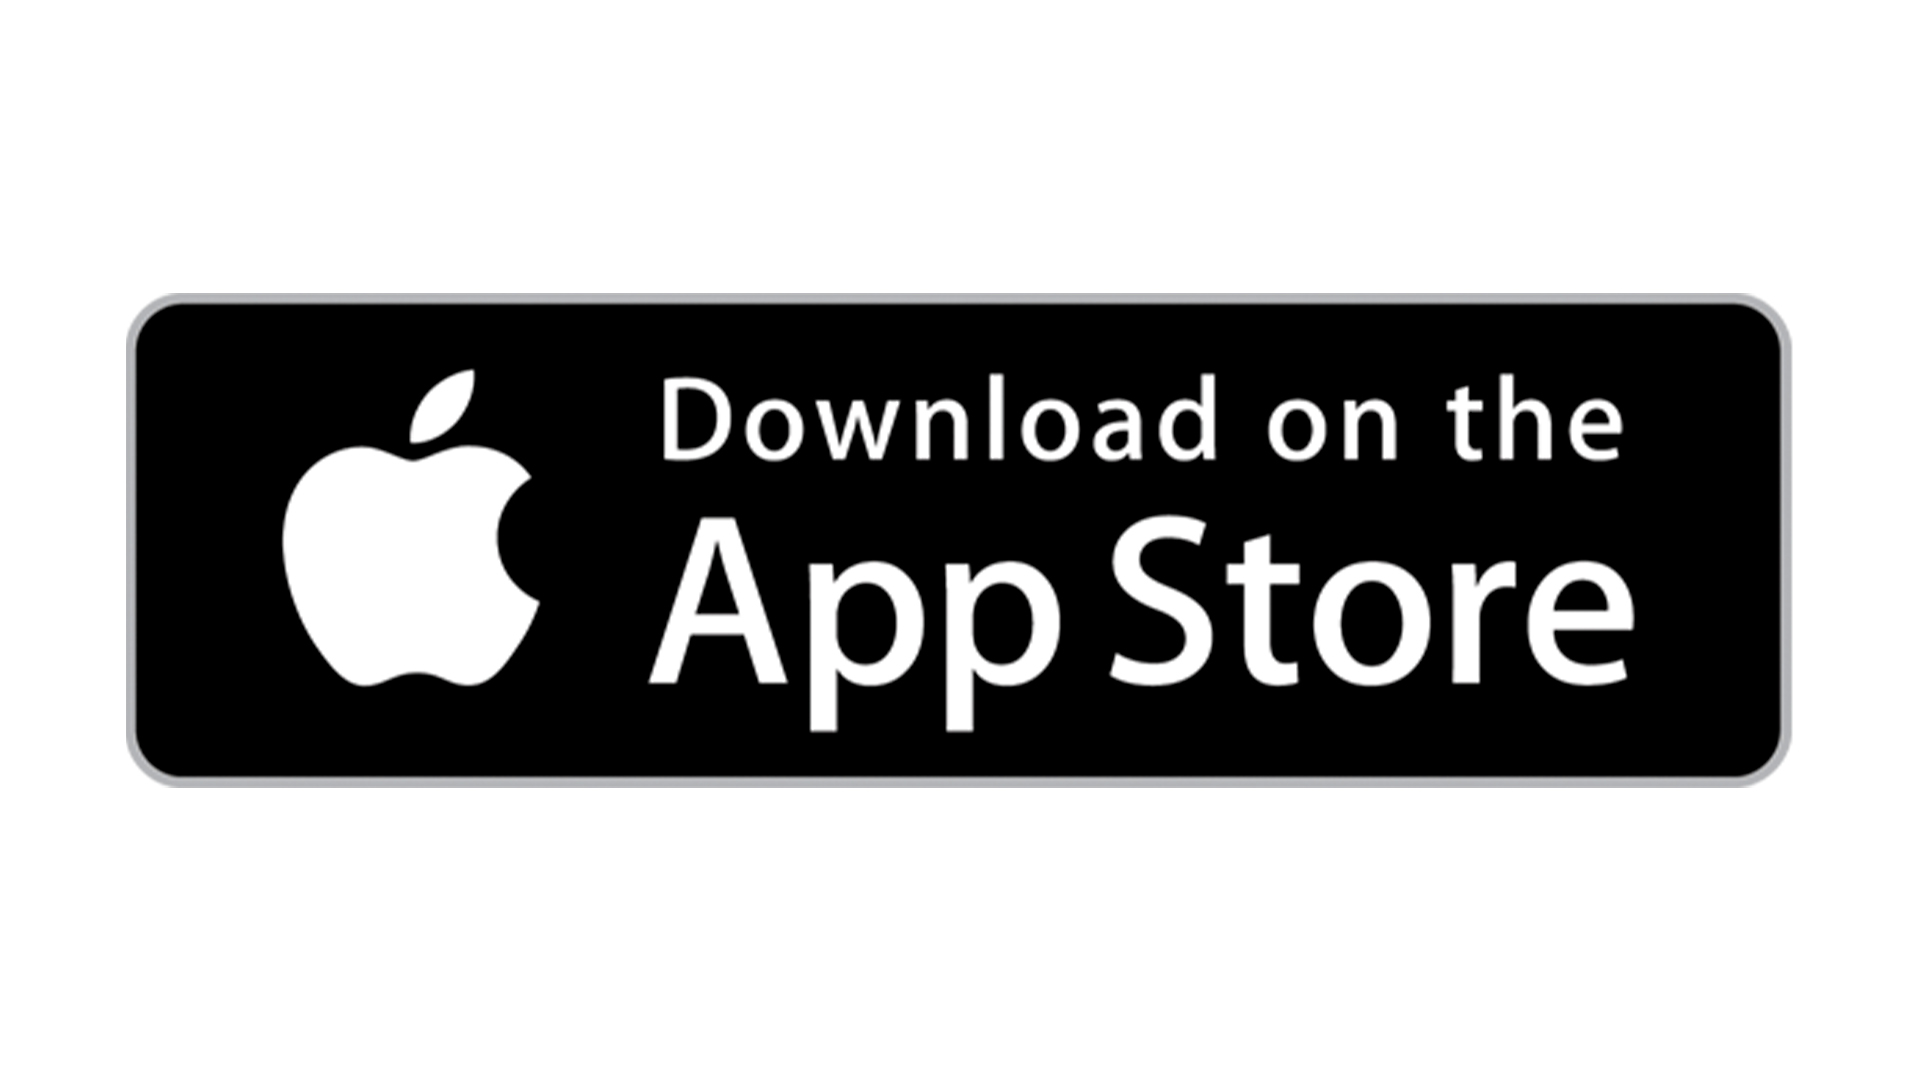 Download the App on the Apple App Store